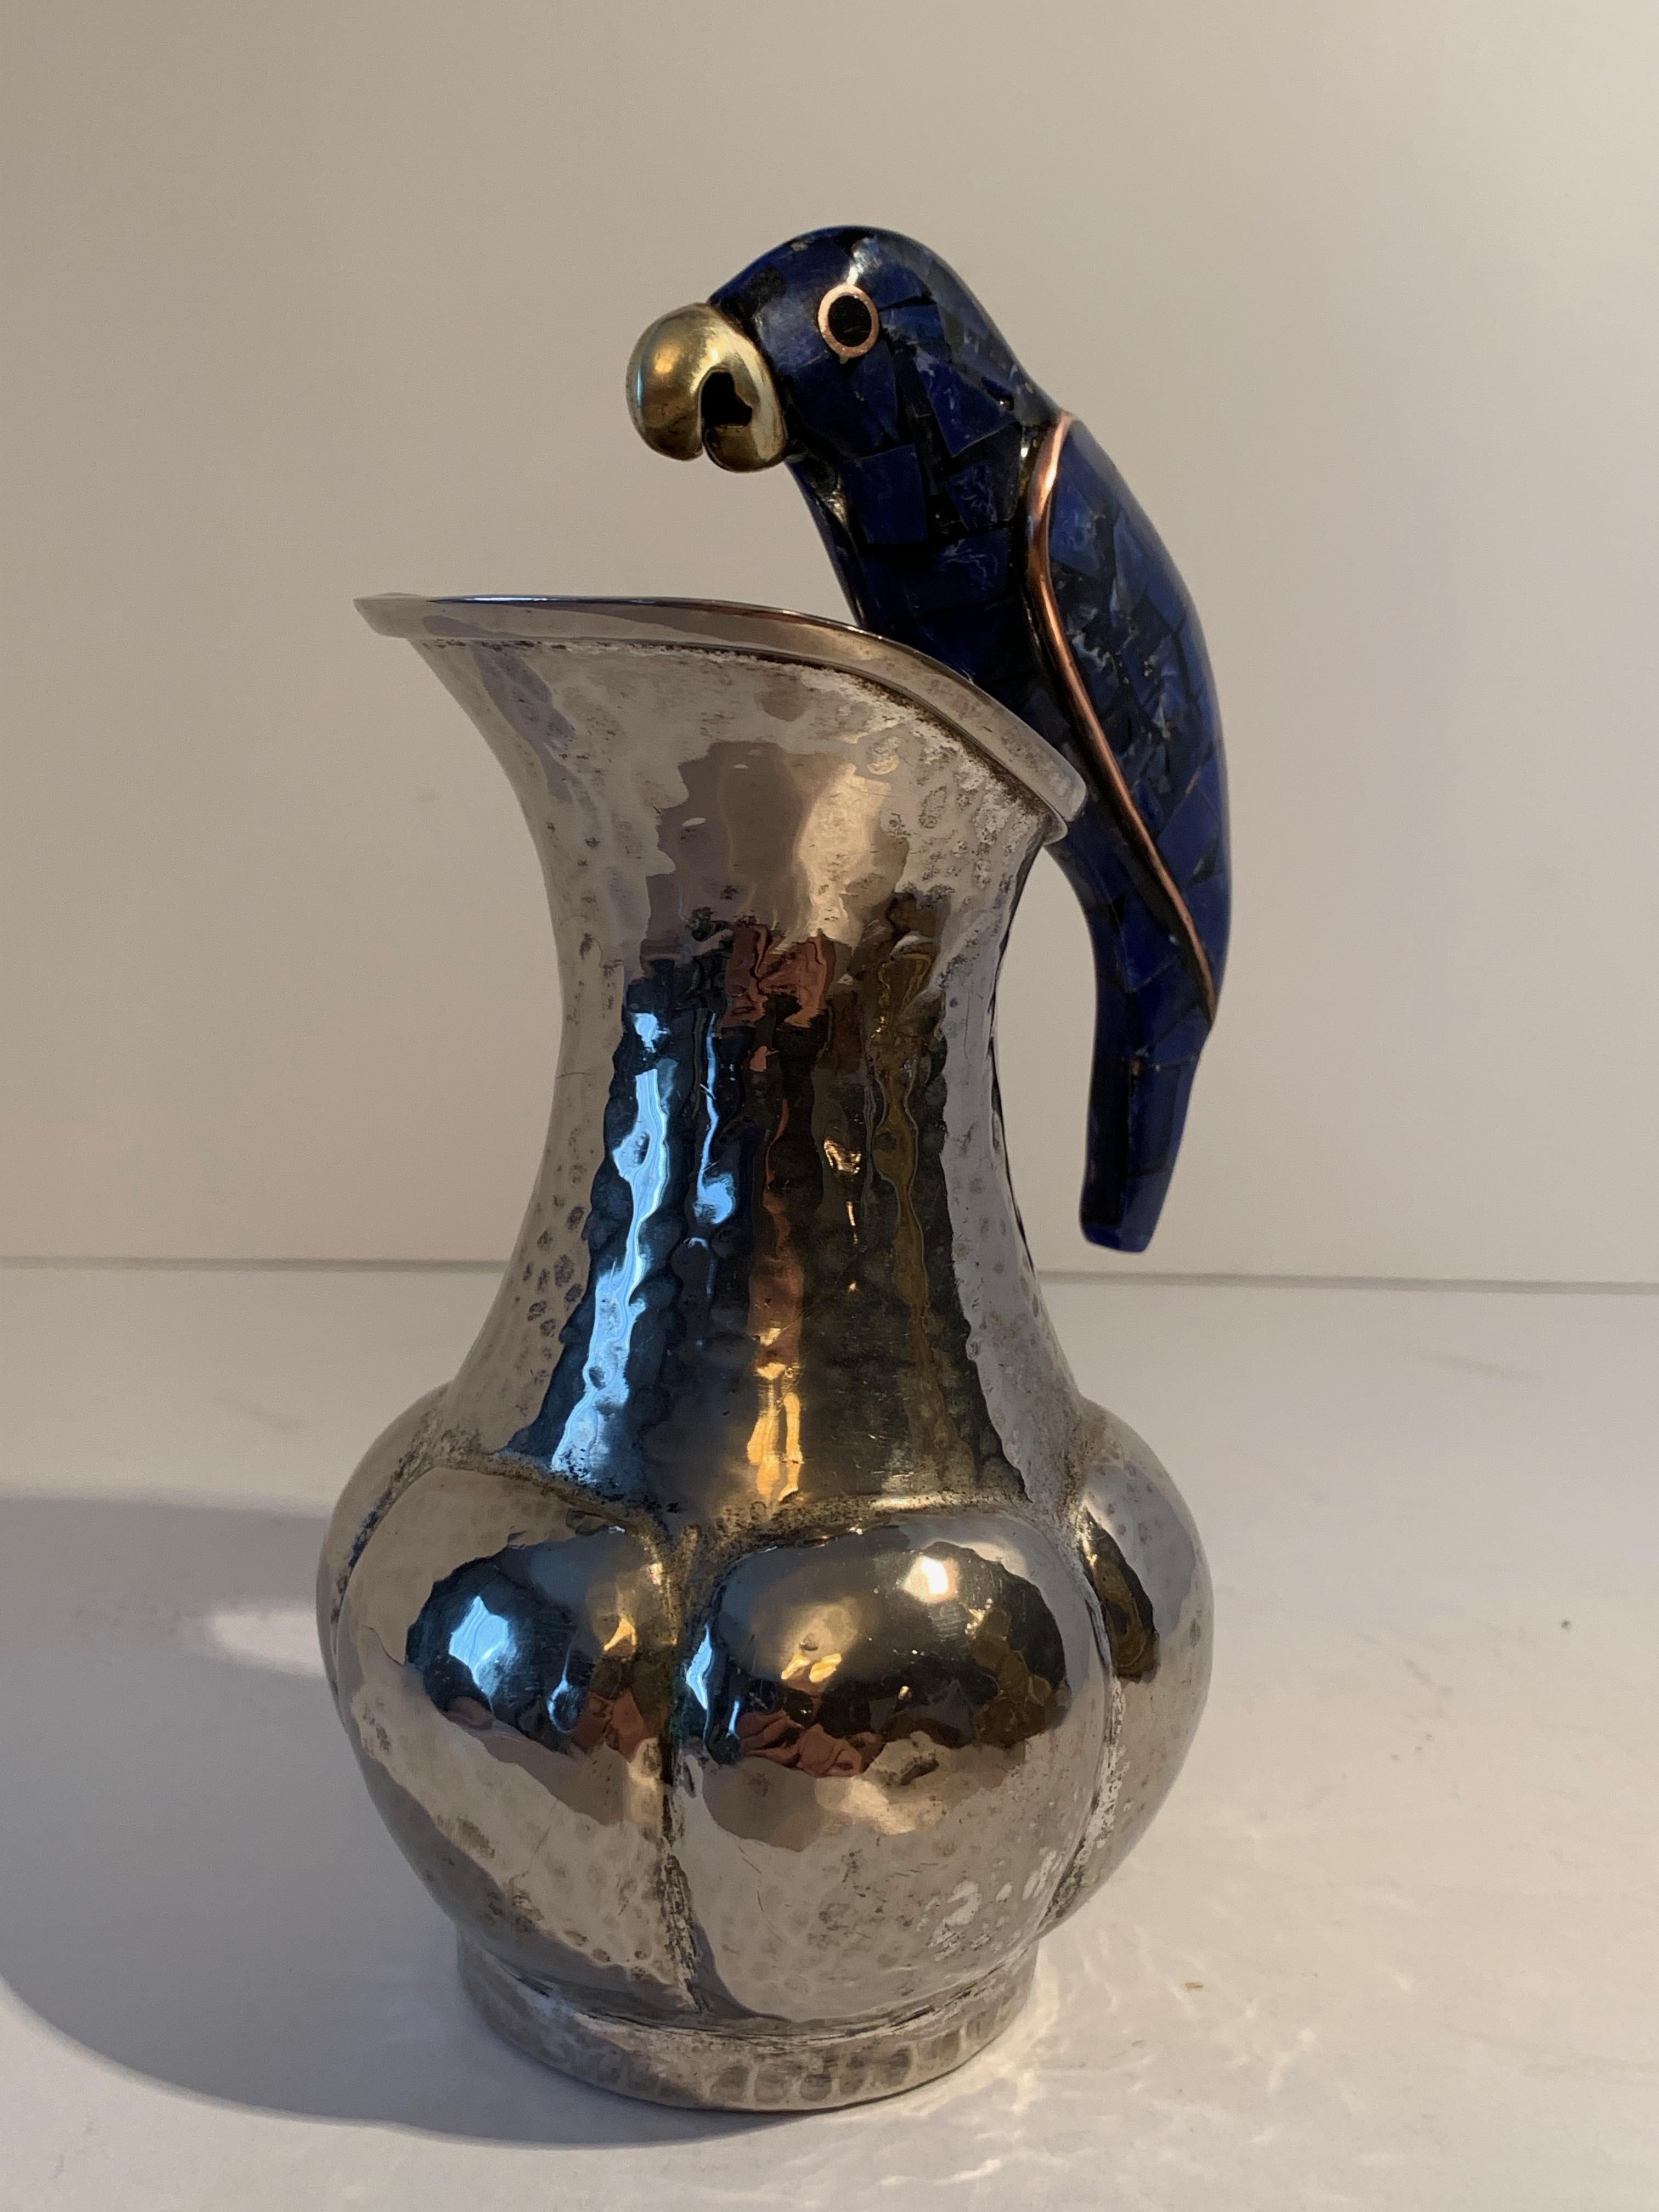 Los Castillo silver plate pitcher with parrot handle - Handsome pitcher well suited for the bar or as a decorative piece. Parrot handle is blue lapis. From Mexico by Taxco Mexico.